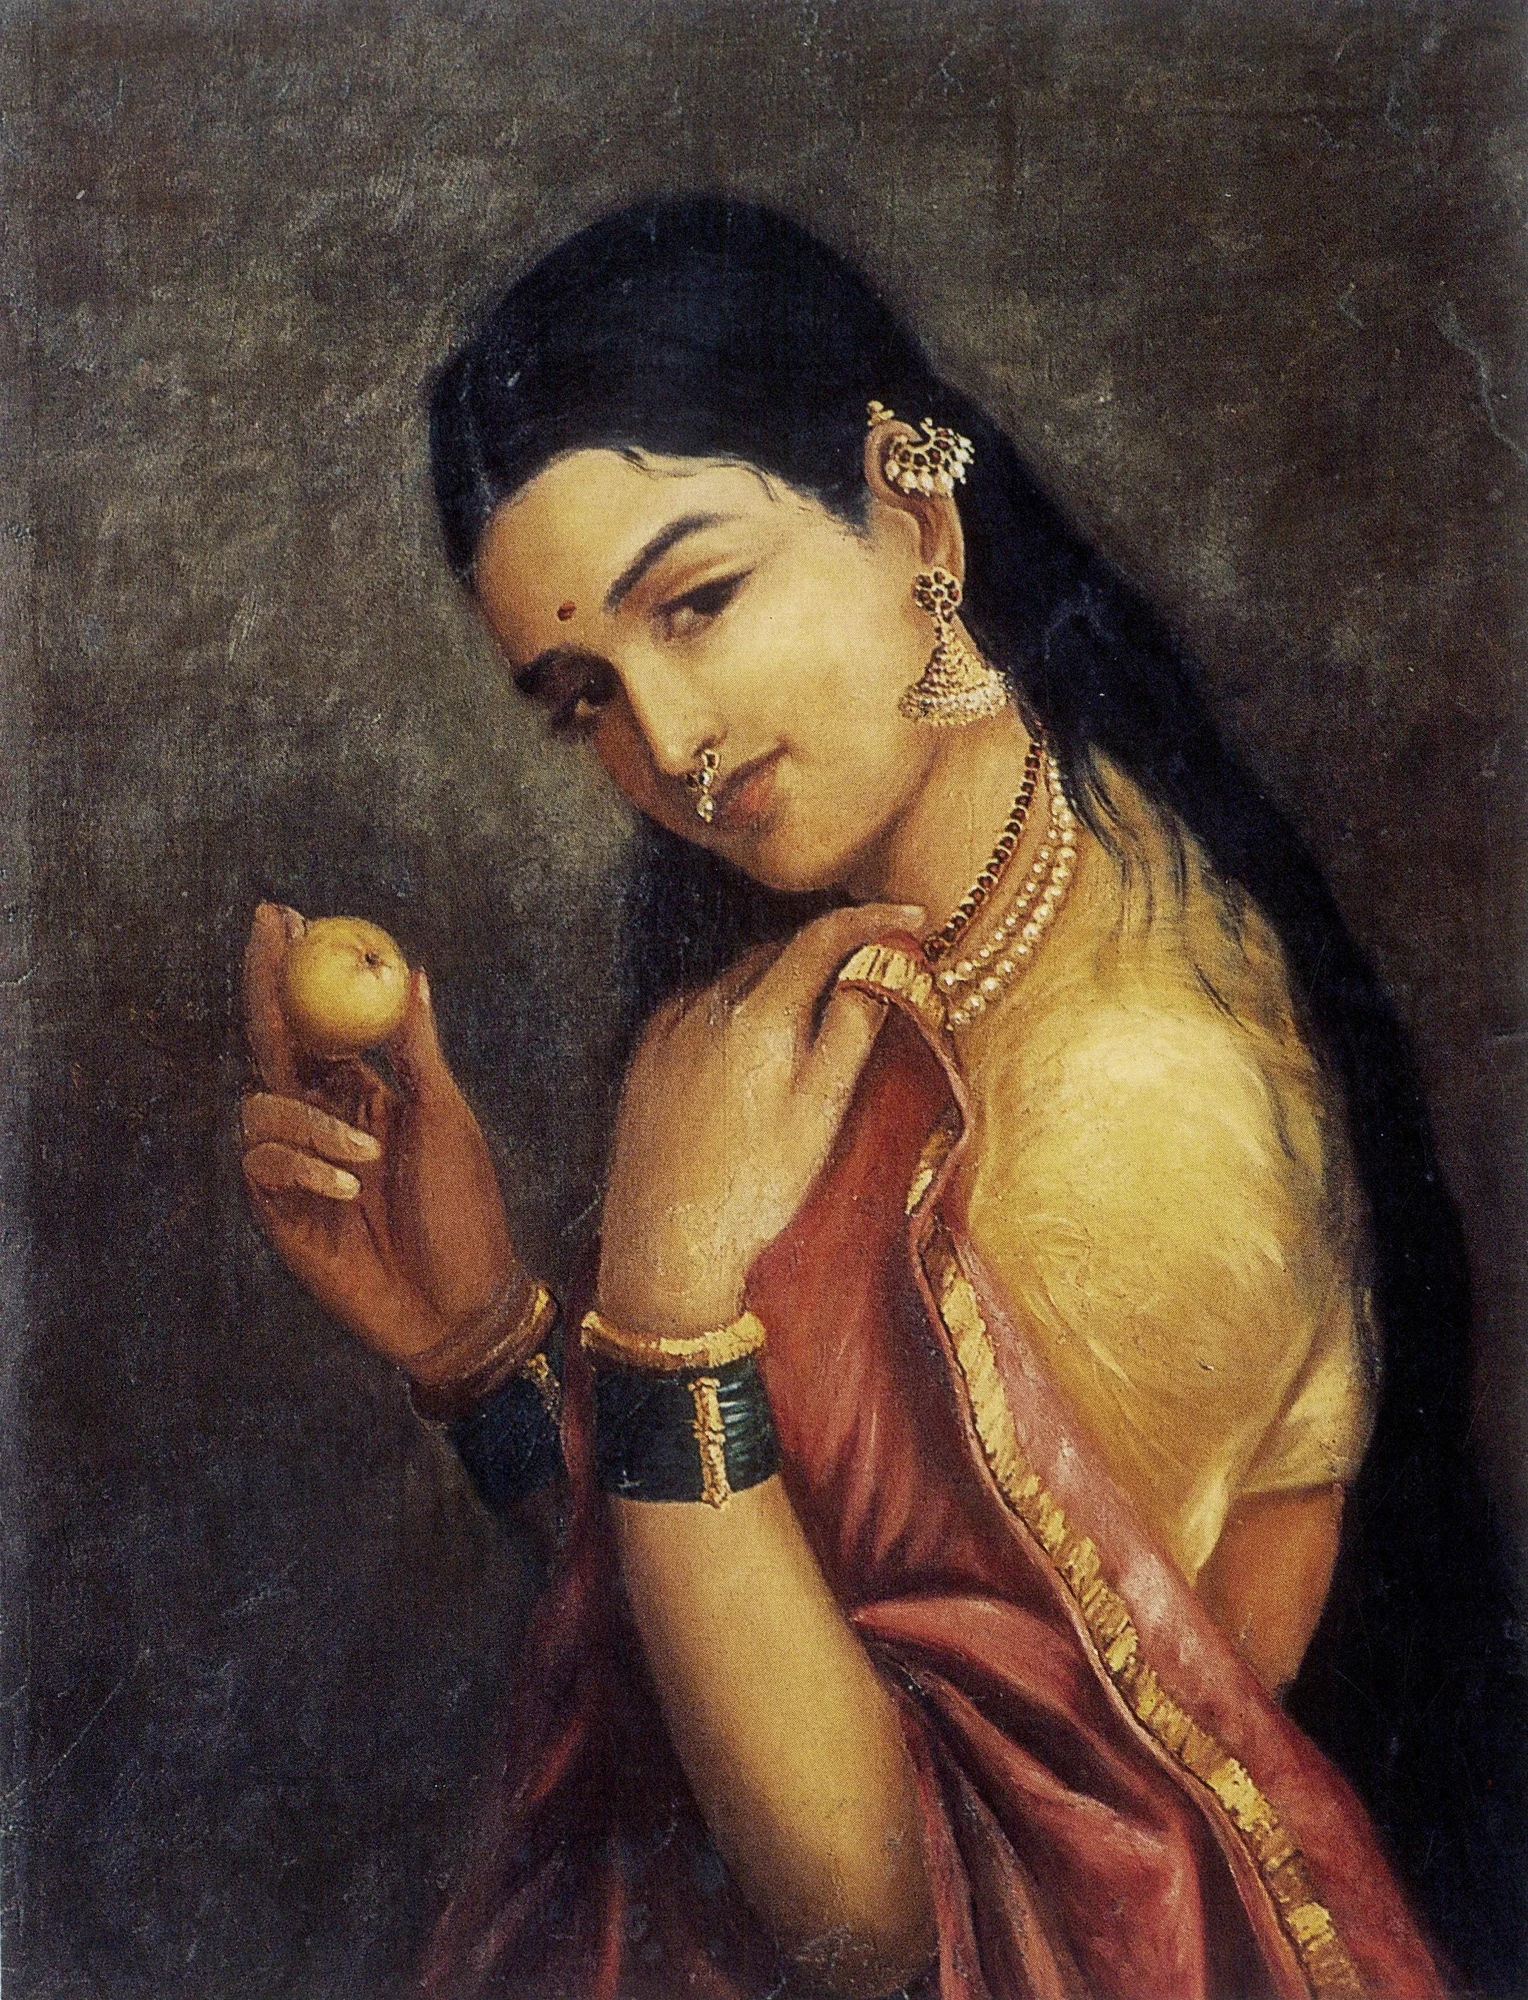 Painting of a person holding a small round fruit in one hand, dressed in traditional Indian clothing and jewelry, looking off to the side, against a grey background.